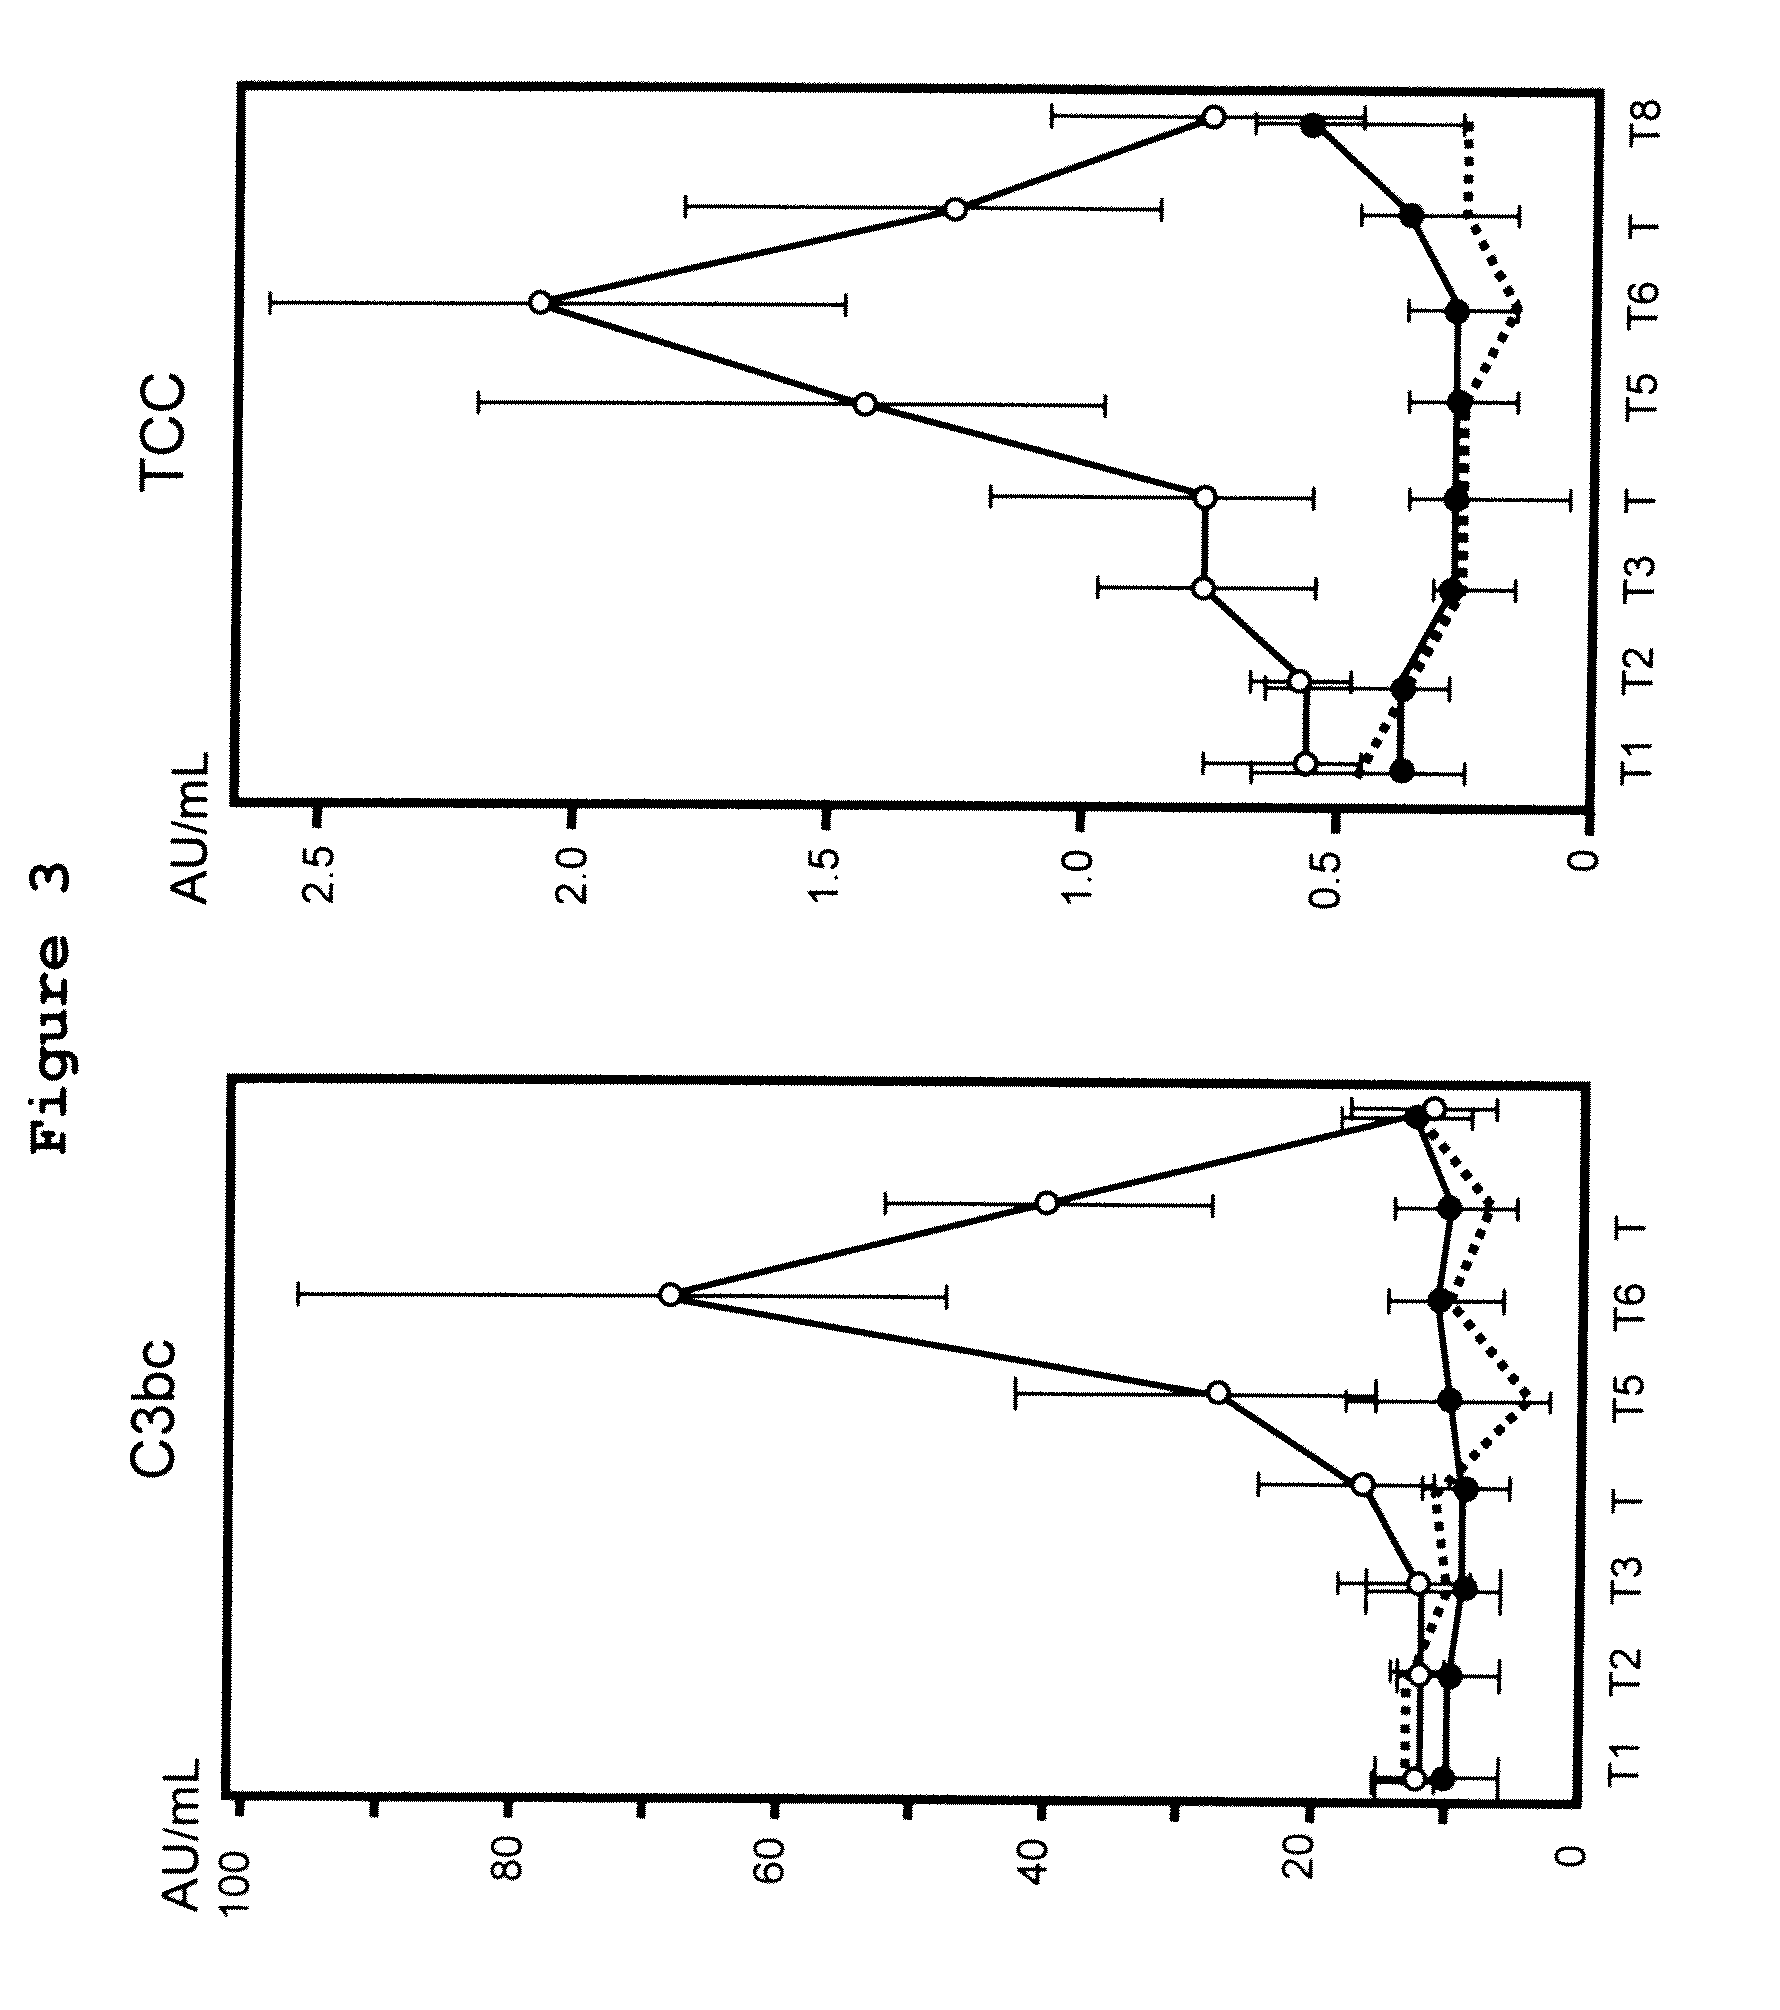 Methods for preventing and treating tissue damage associated with ischemia-reperfusion injury